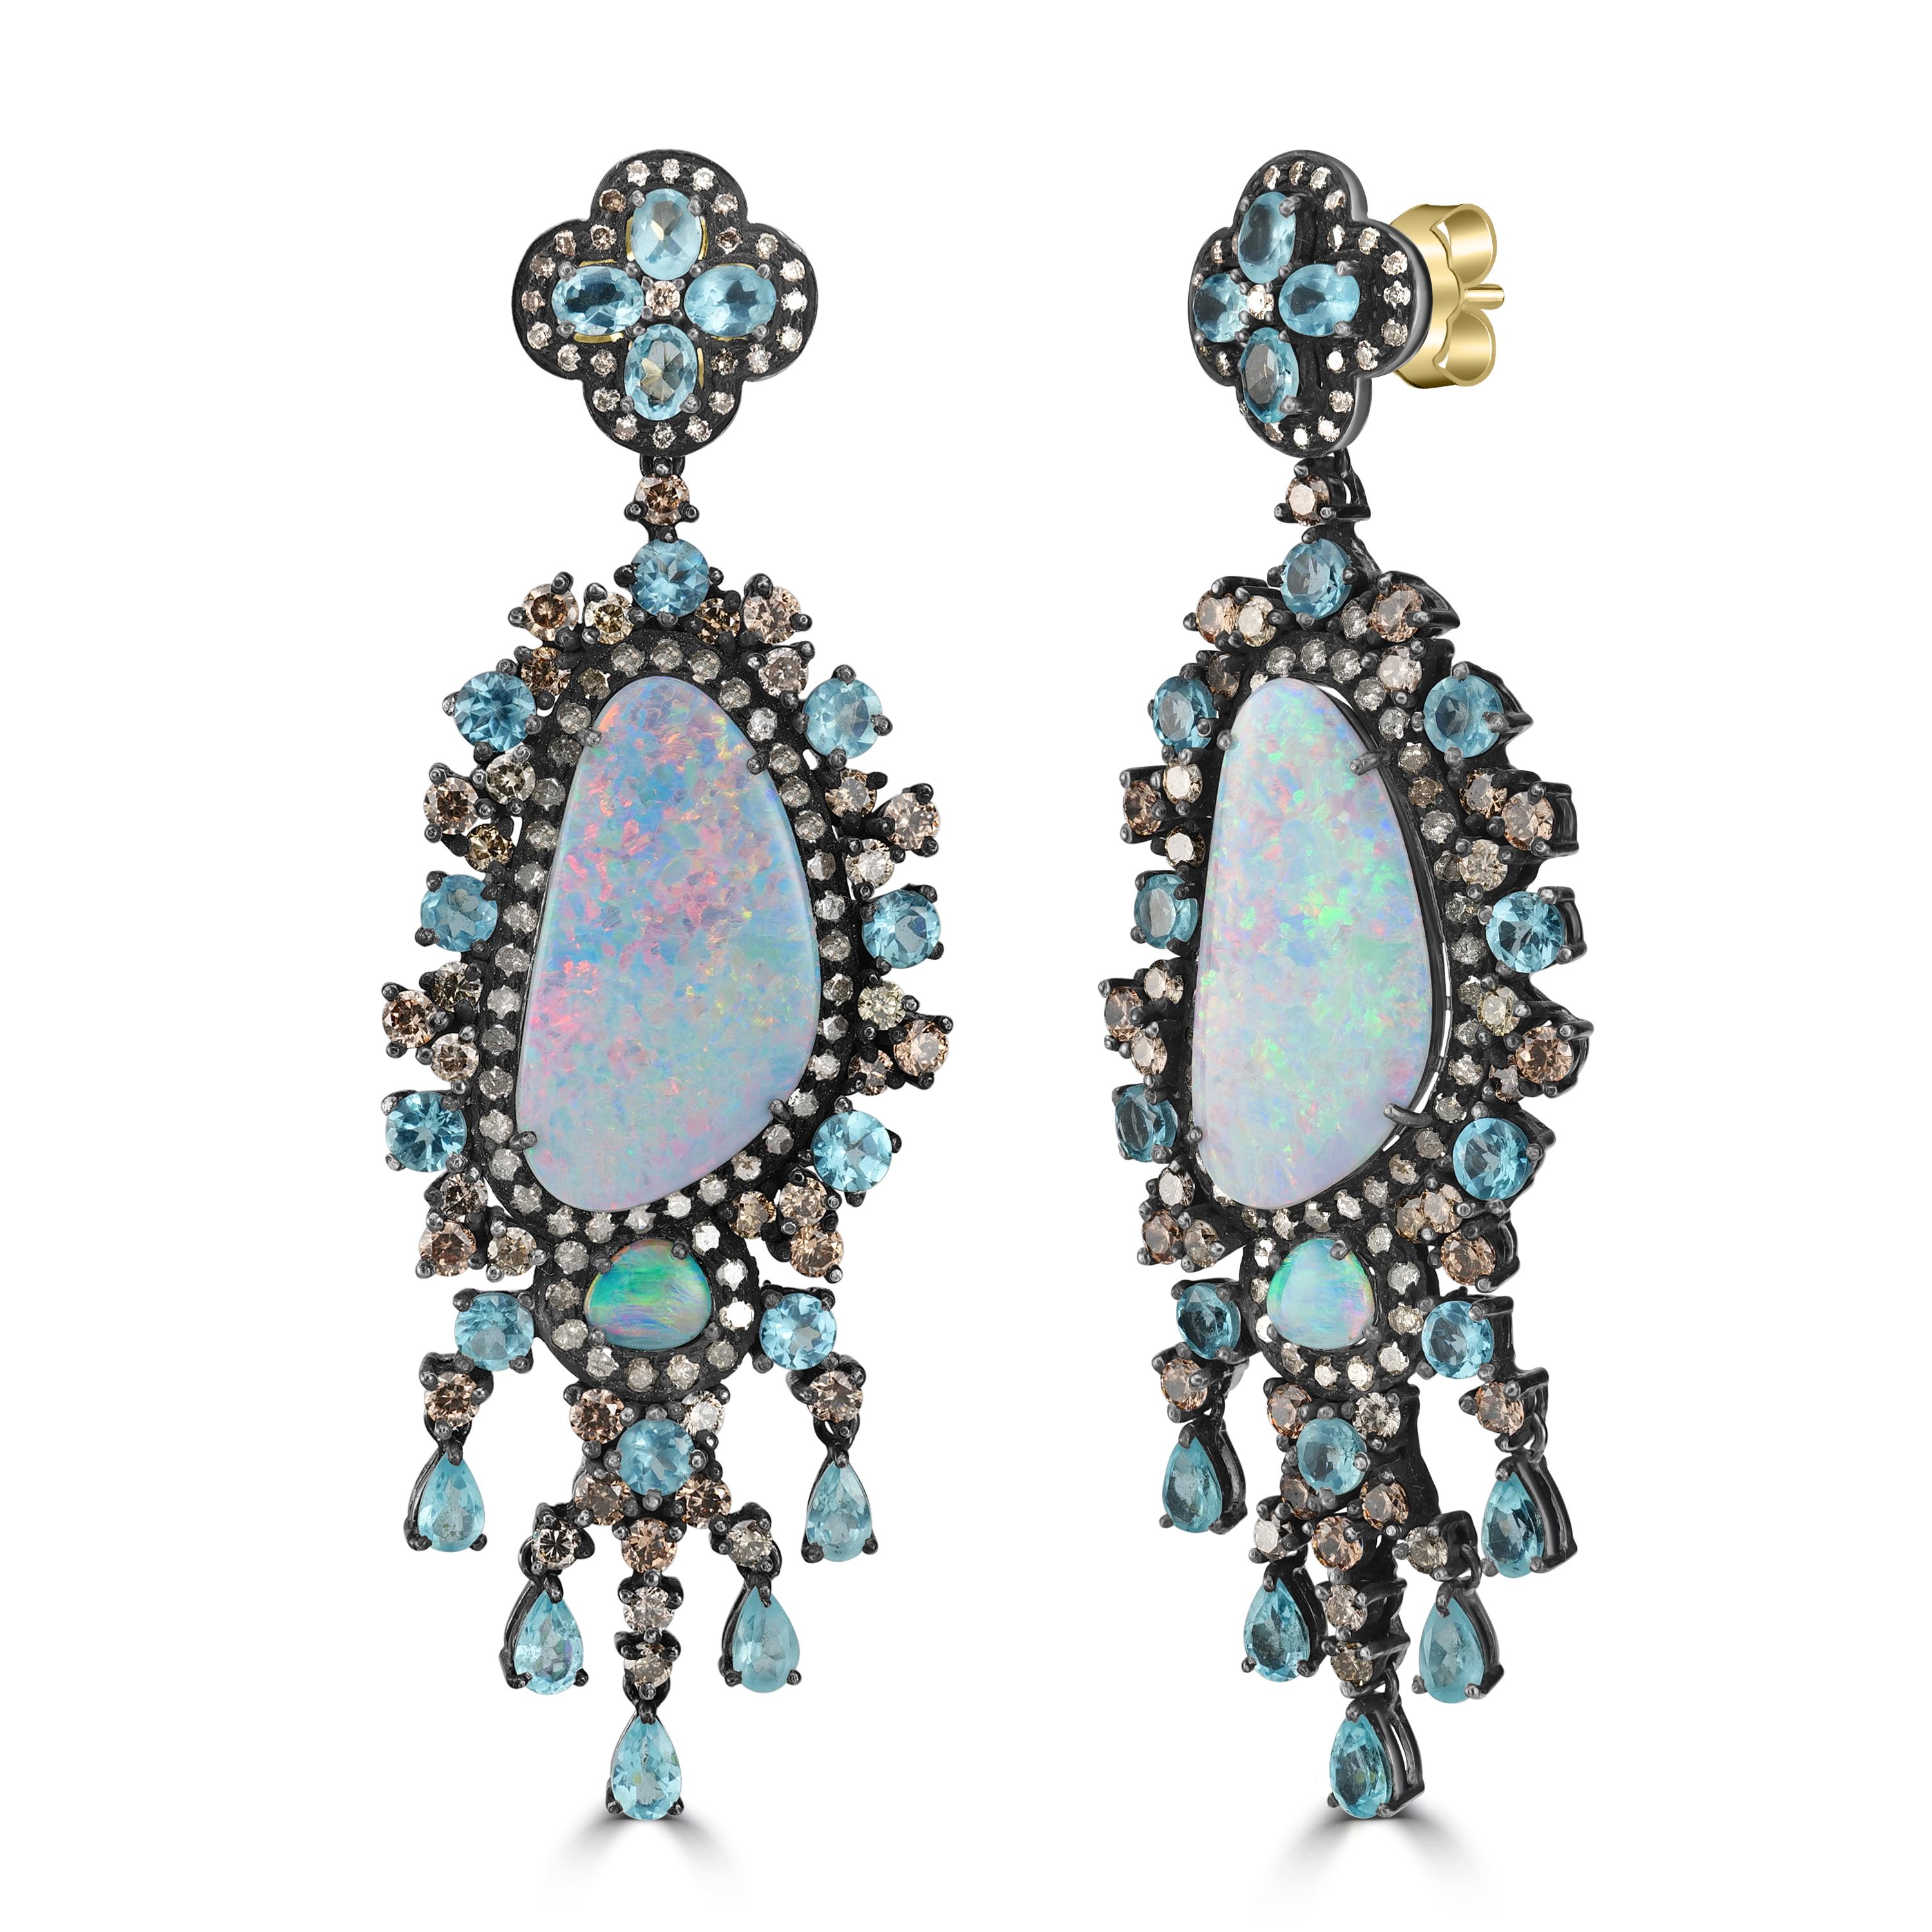 Introducing the Victorian 32 Cttw. Blue Opal, Apatite, C.Z., and Diamond Chandelier Earrings, a stunning blend of timeless elegance and contemporary flair. These earrings are a true testament to the artistry and craftsmanship that defines Victorian